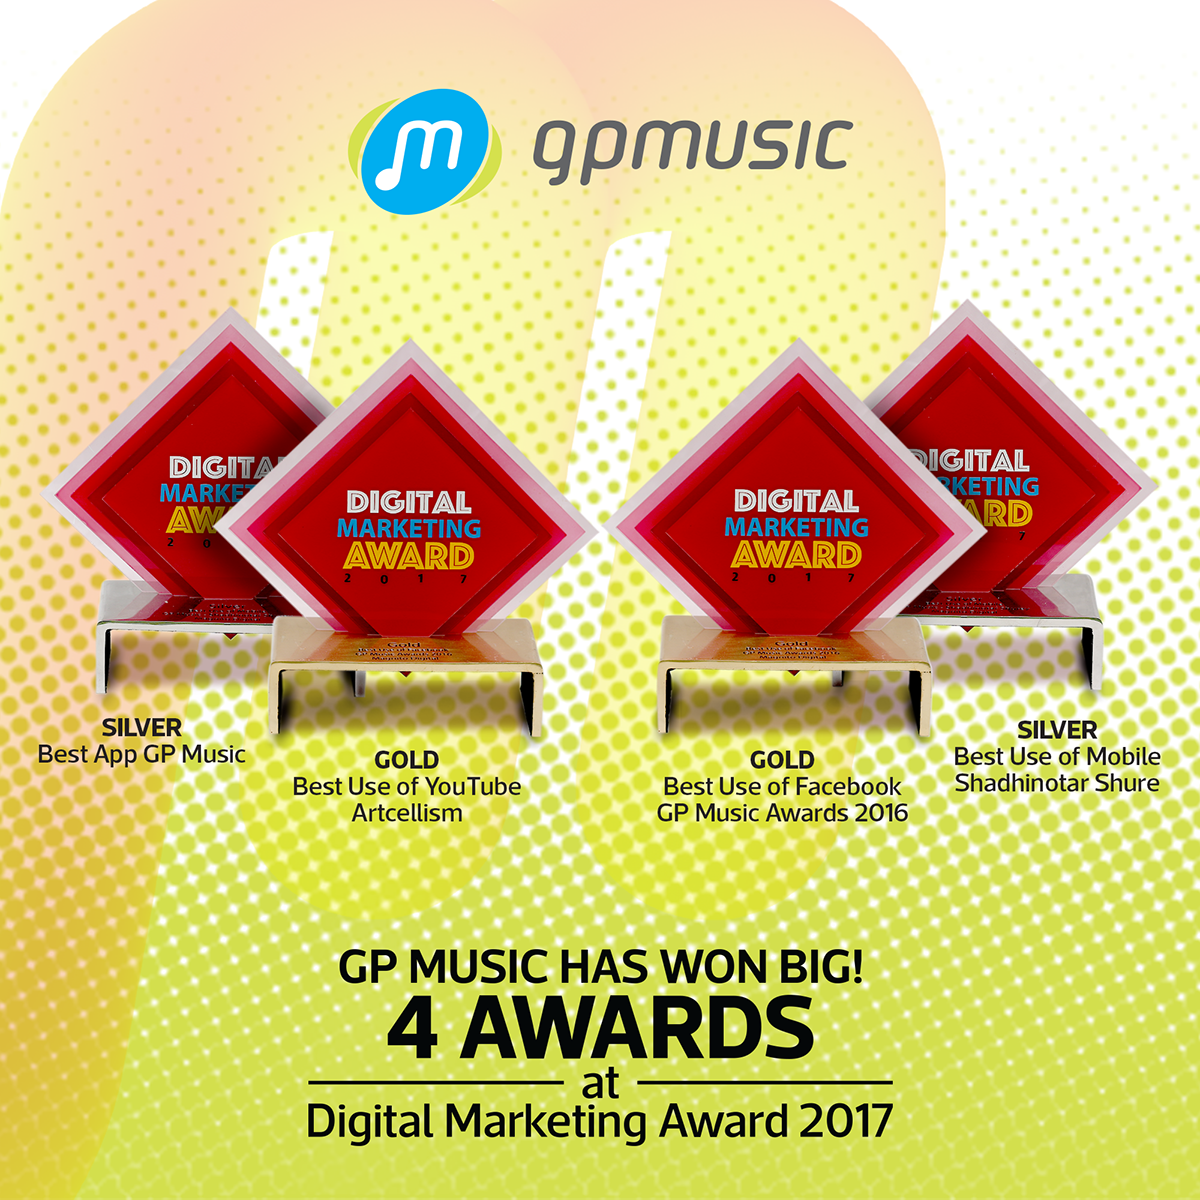 Singer AWARDS-2016 AWARDS-2016 Campaign GP Music votenow Campaign for GPMusic